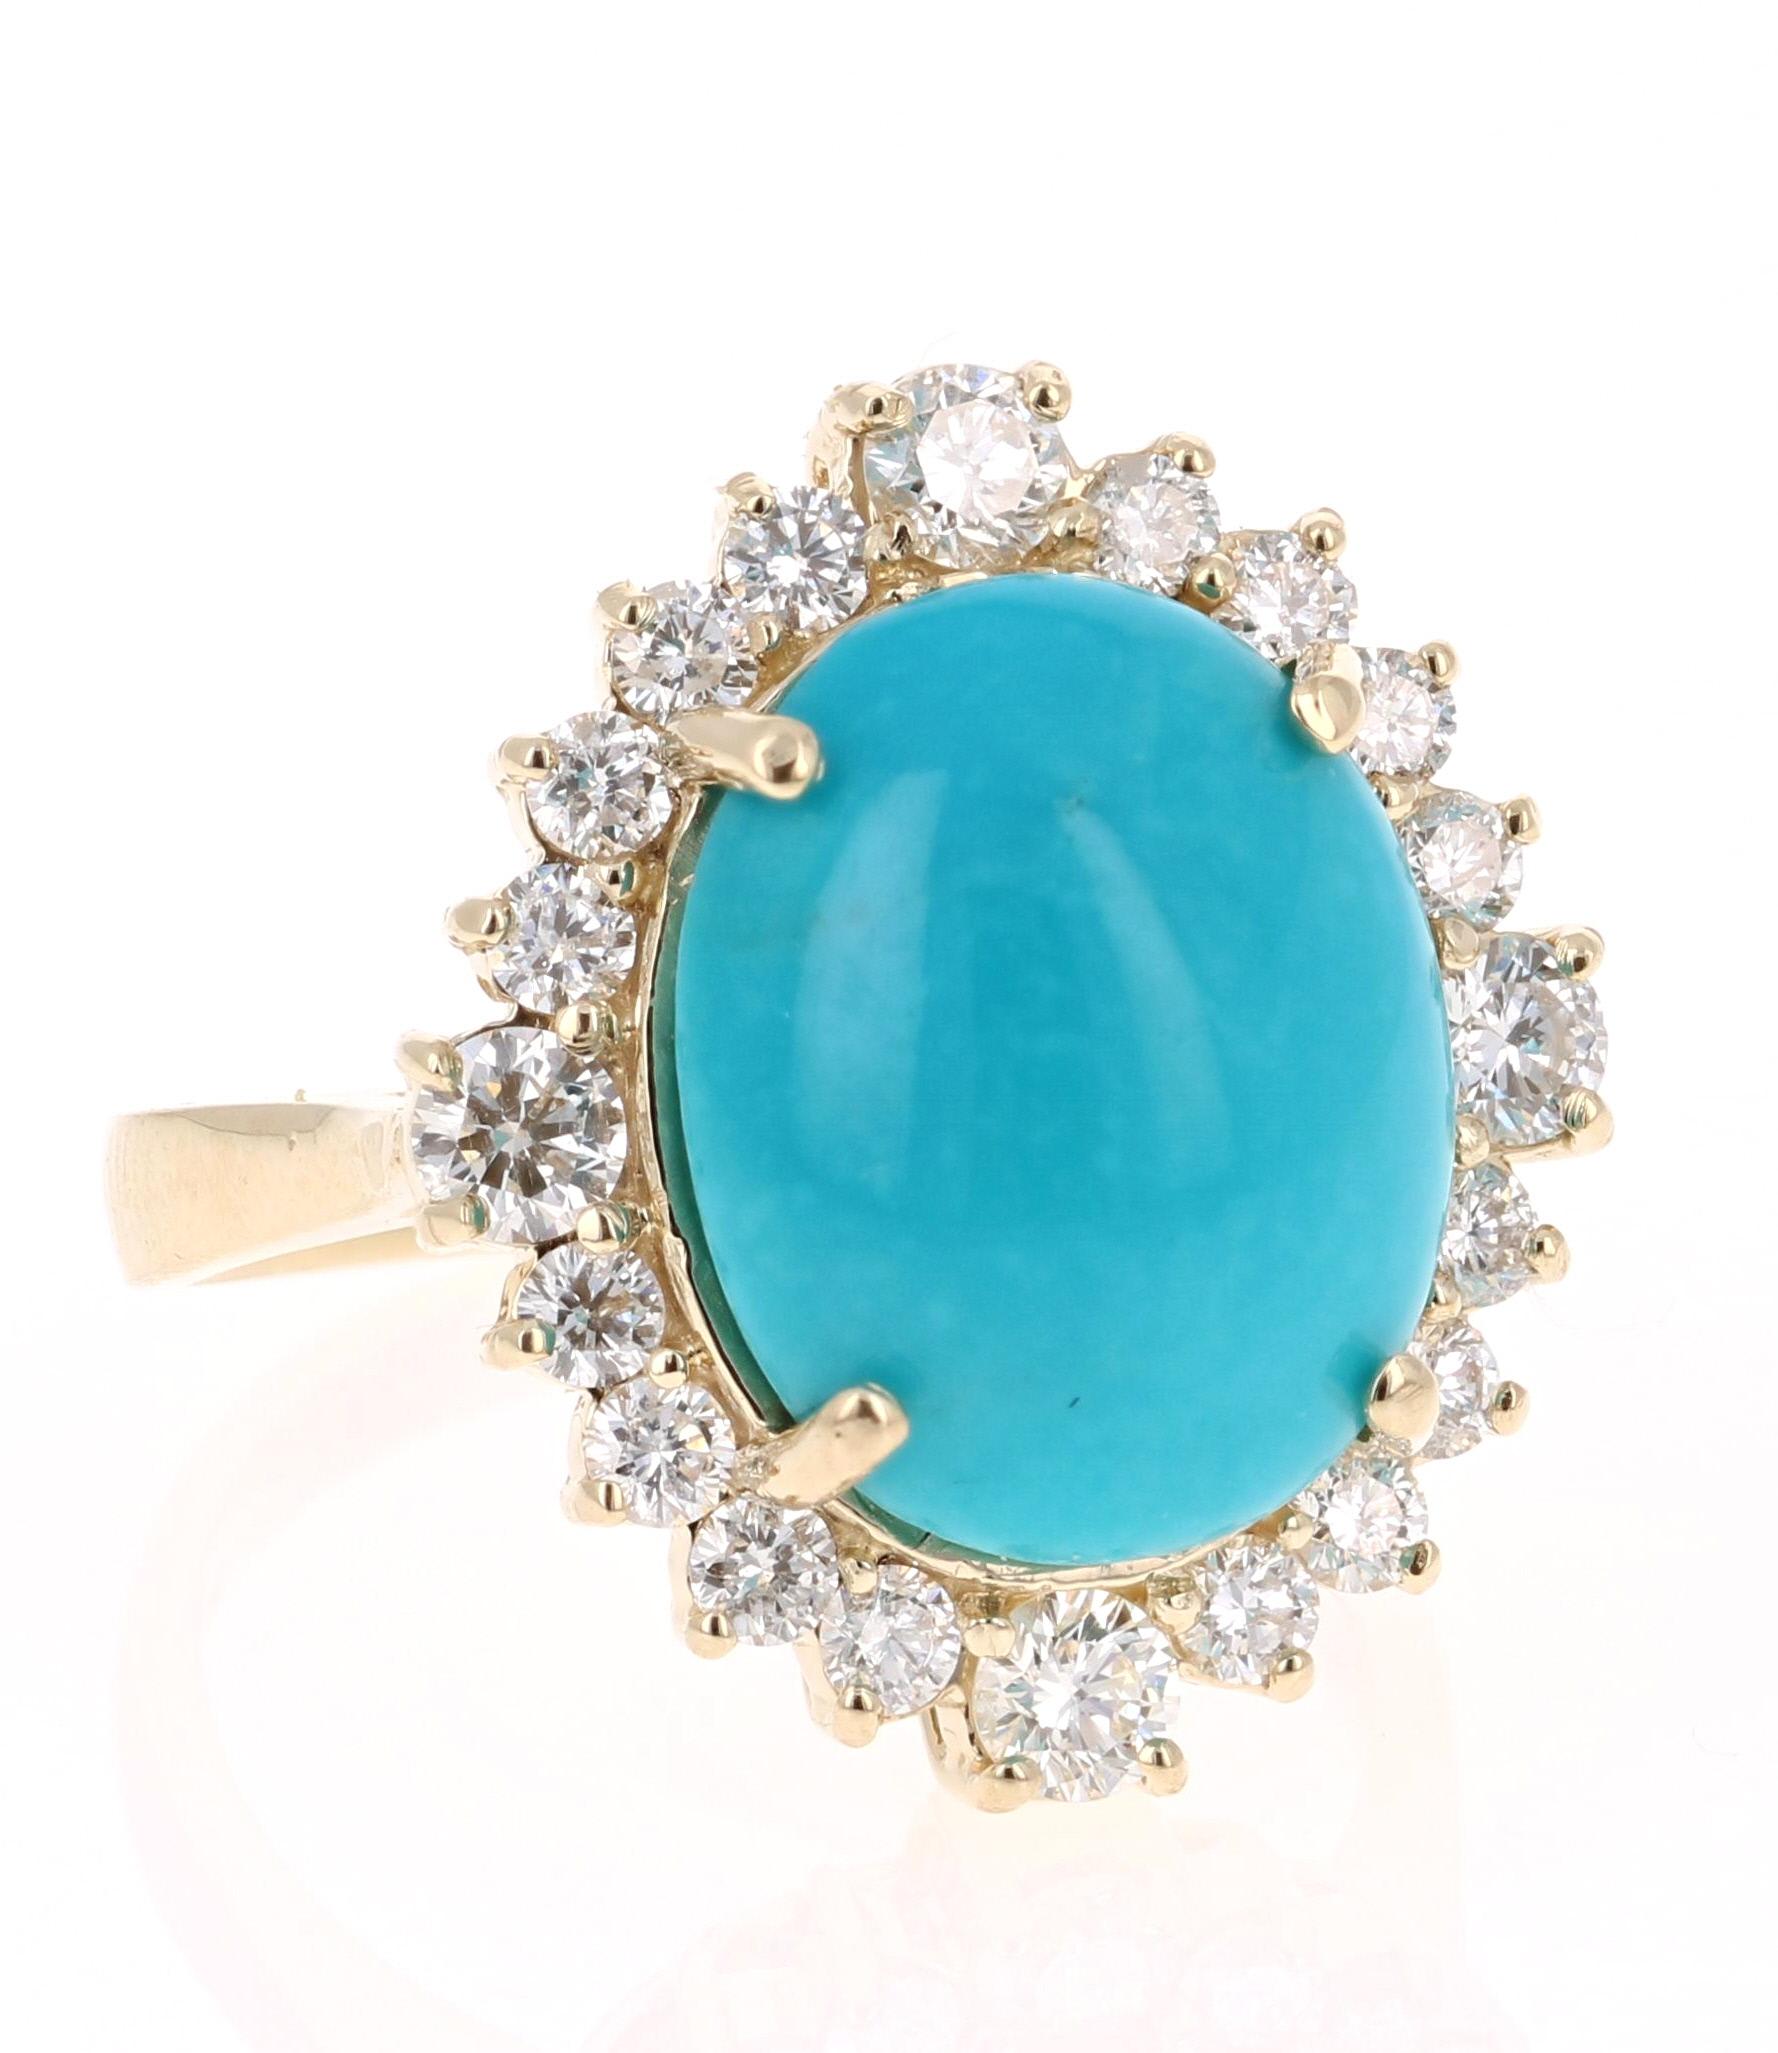 This gorgeous cocktail ring has a beautiful Oval Cut Turquoise that weighs 7.14 carats and 20 Round Cut Diamonds that weigh 1.08 carats. The clarity and color of the Diamonds are SI2-F.  The total carat weight of the ring is 8.22 carats. 

It is